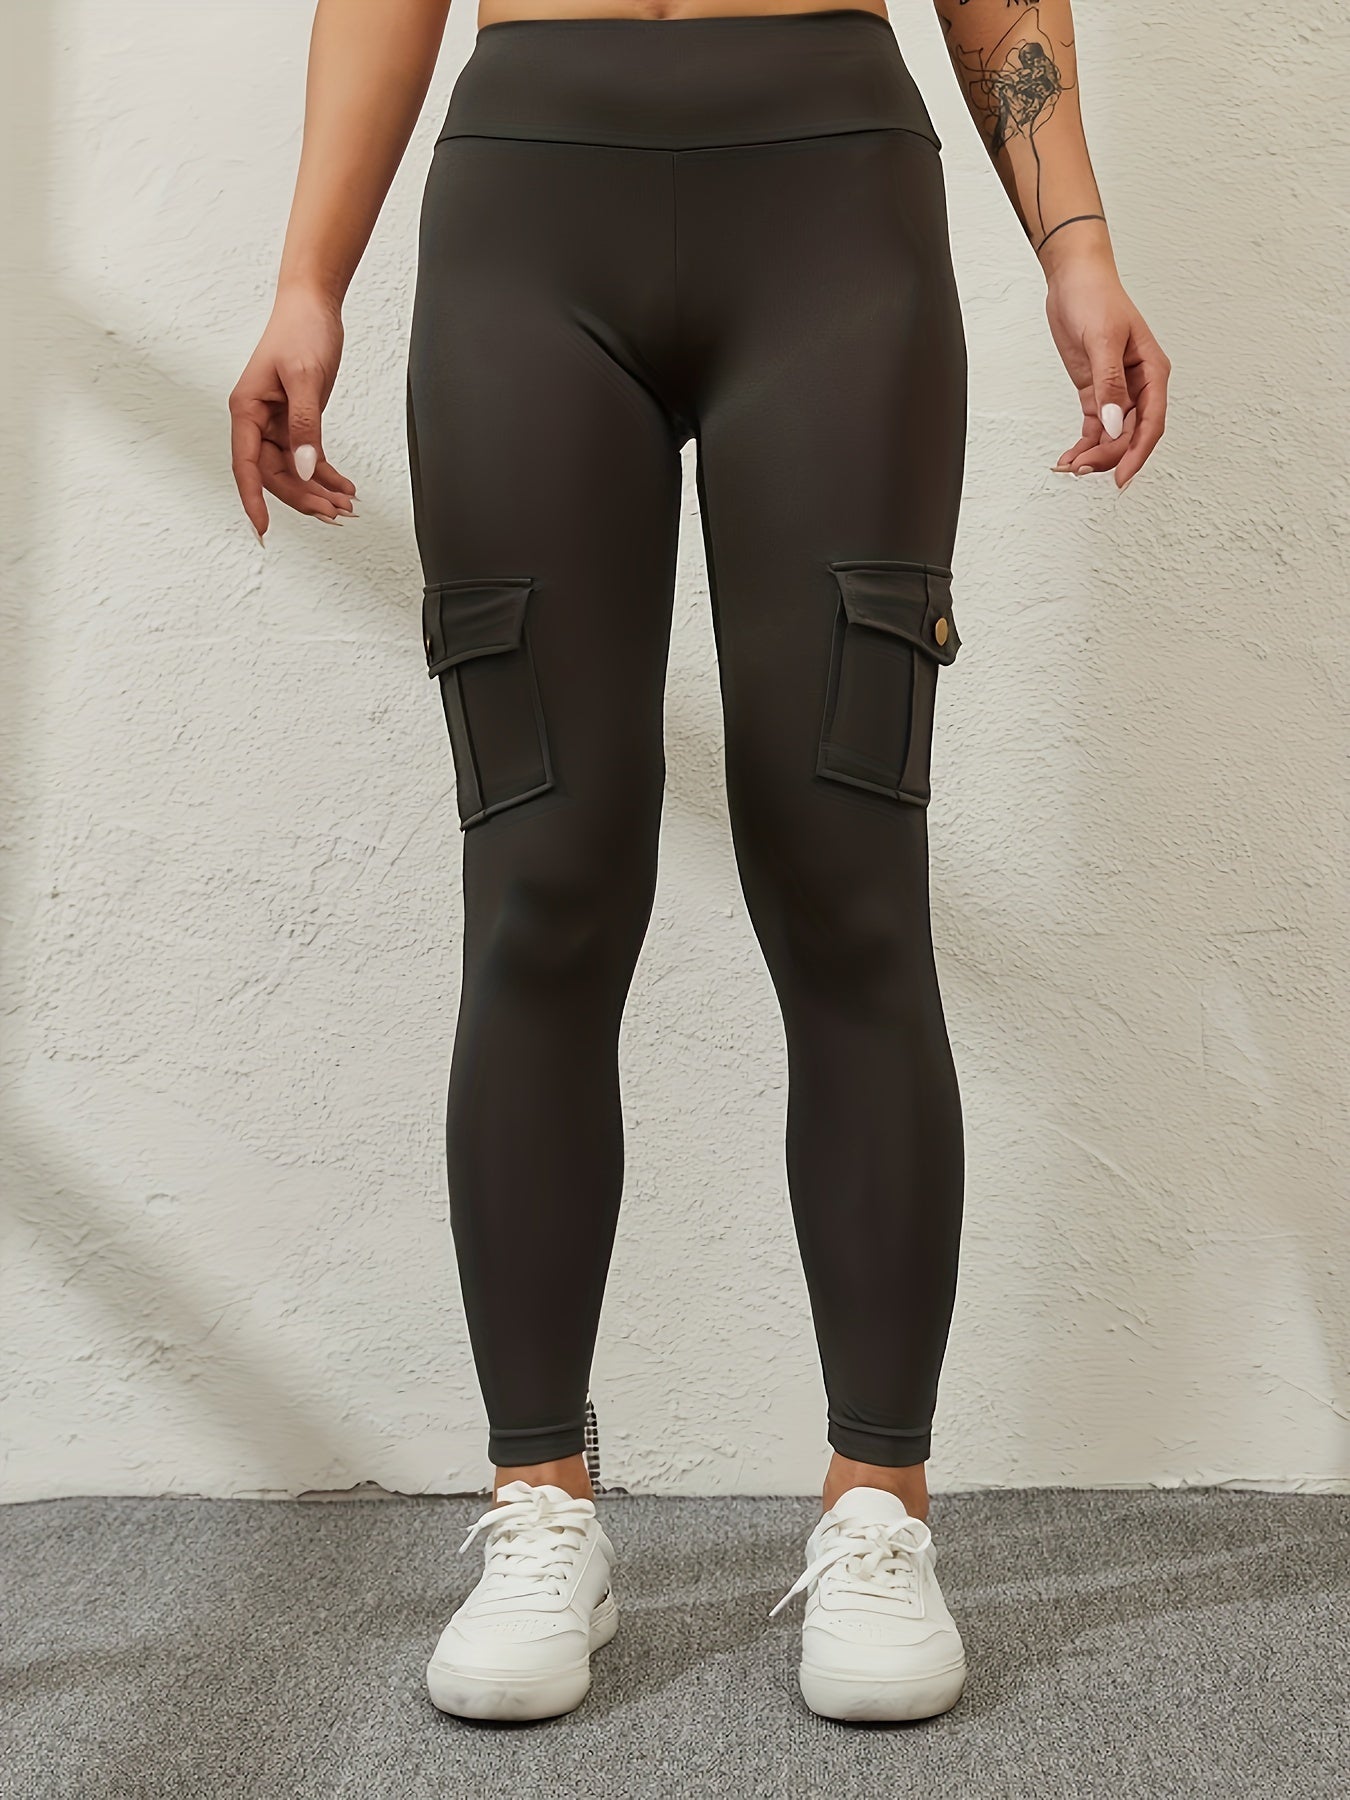 Versatile & Chic Outdoor Activewear Pants for Women - Stretchy, Durable, with Multi-Pockets for Spring to Fall Adventures